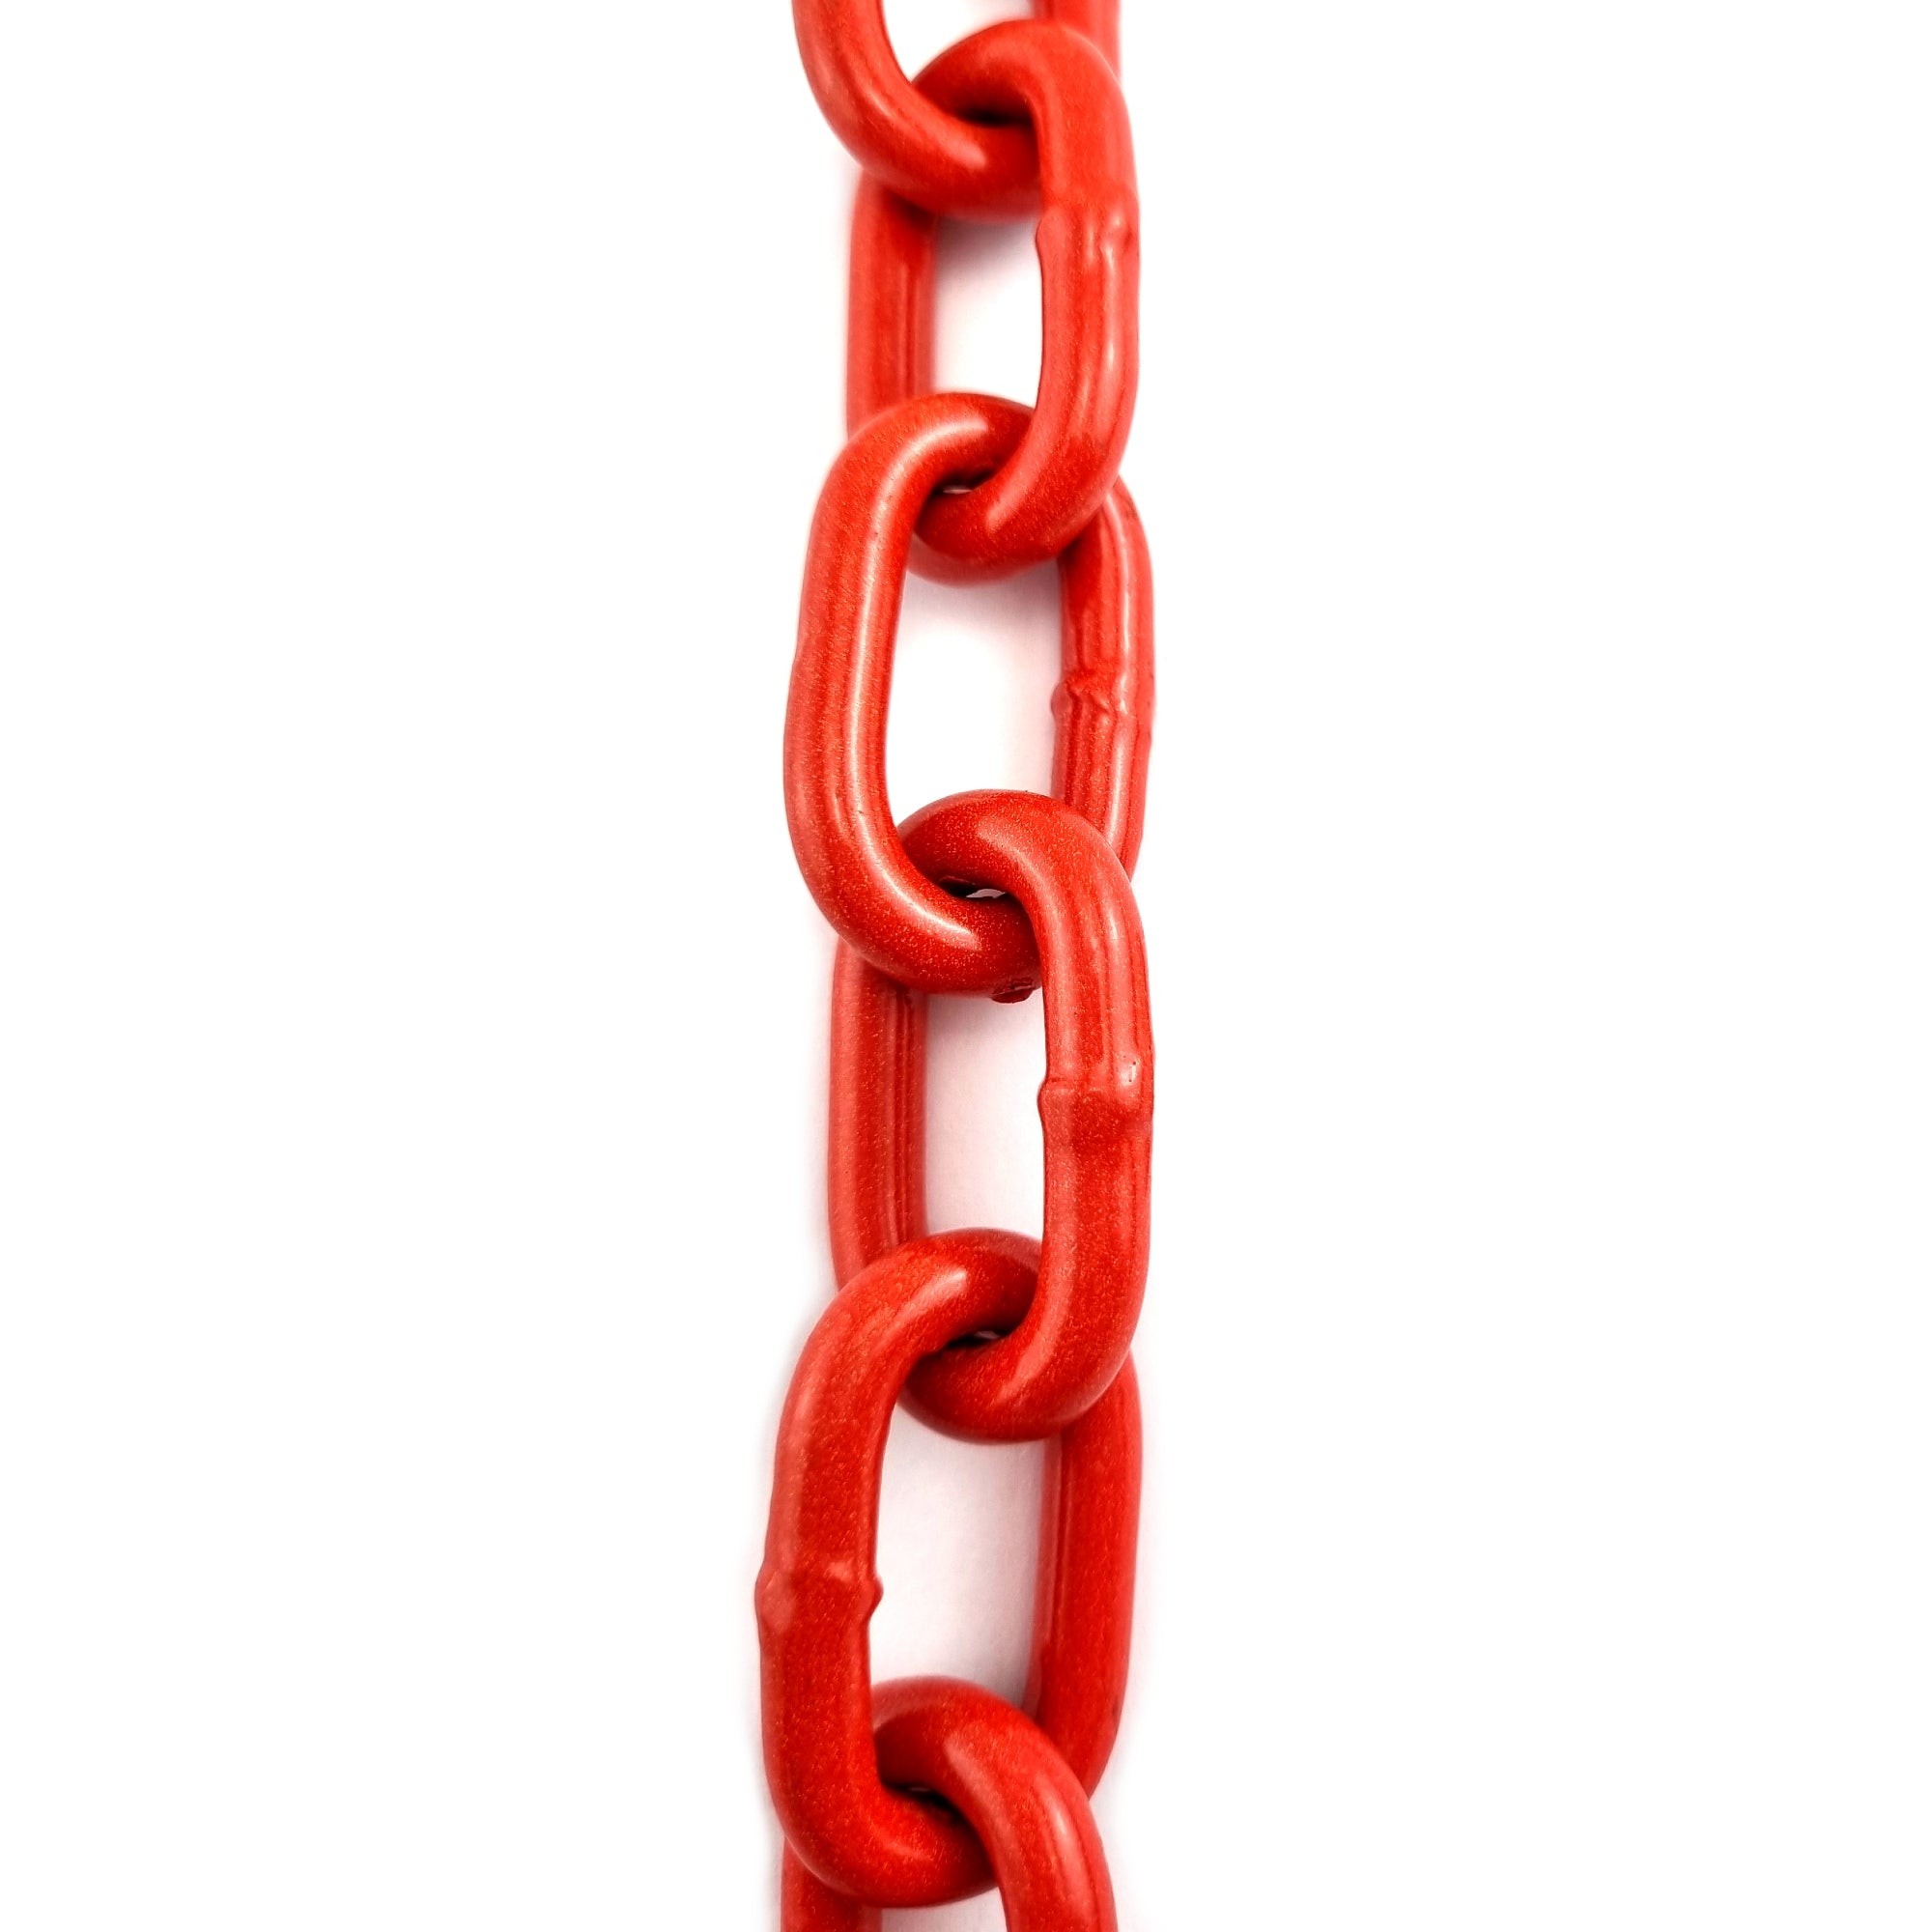 Welded Steel Chain - Red Powder Coated. Size: 6mm. Chain by the metre or bulk buy 25kg buckets. Shipping Australia wide. Shop online chain.com.au